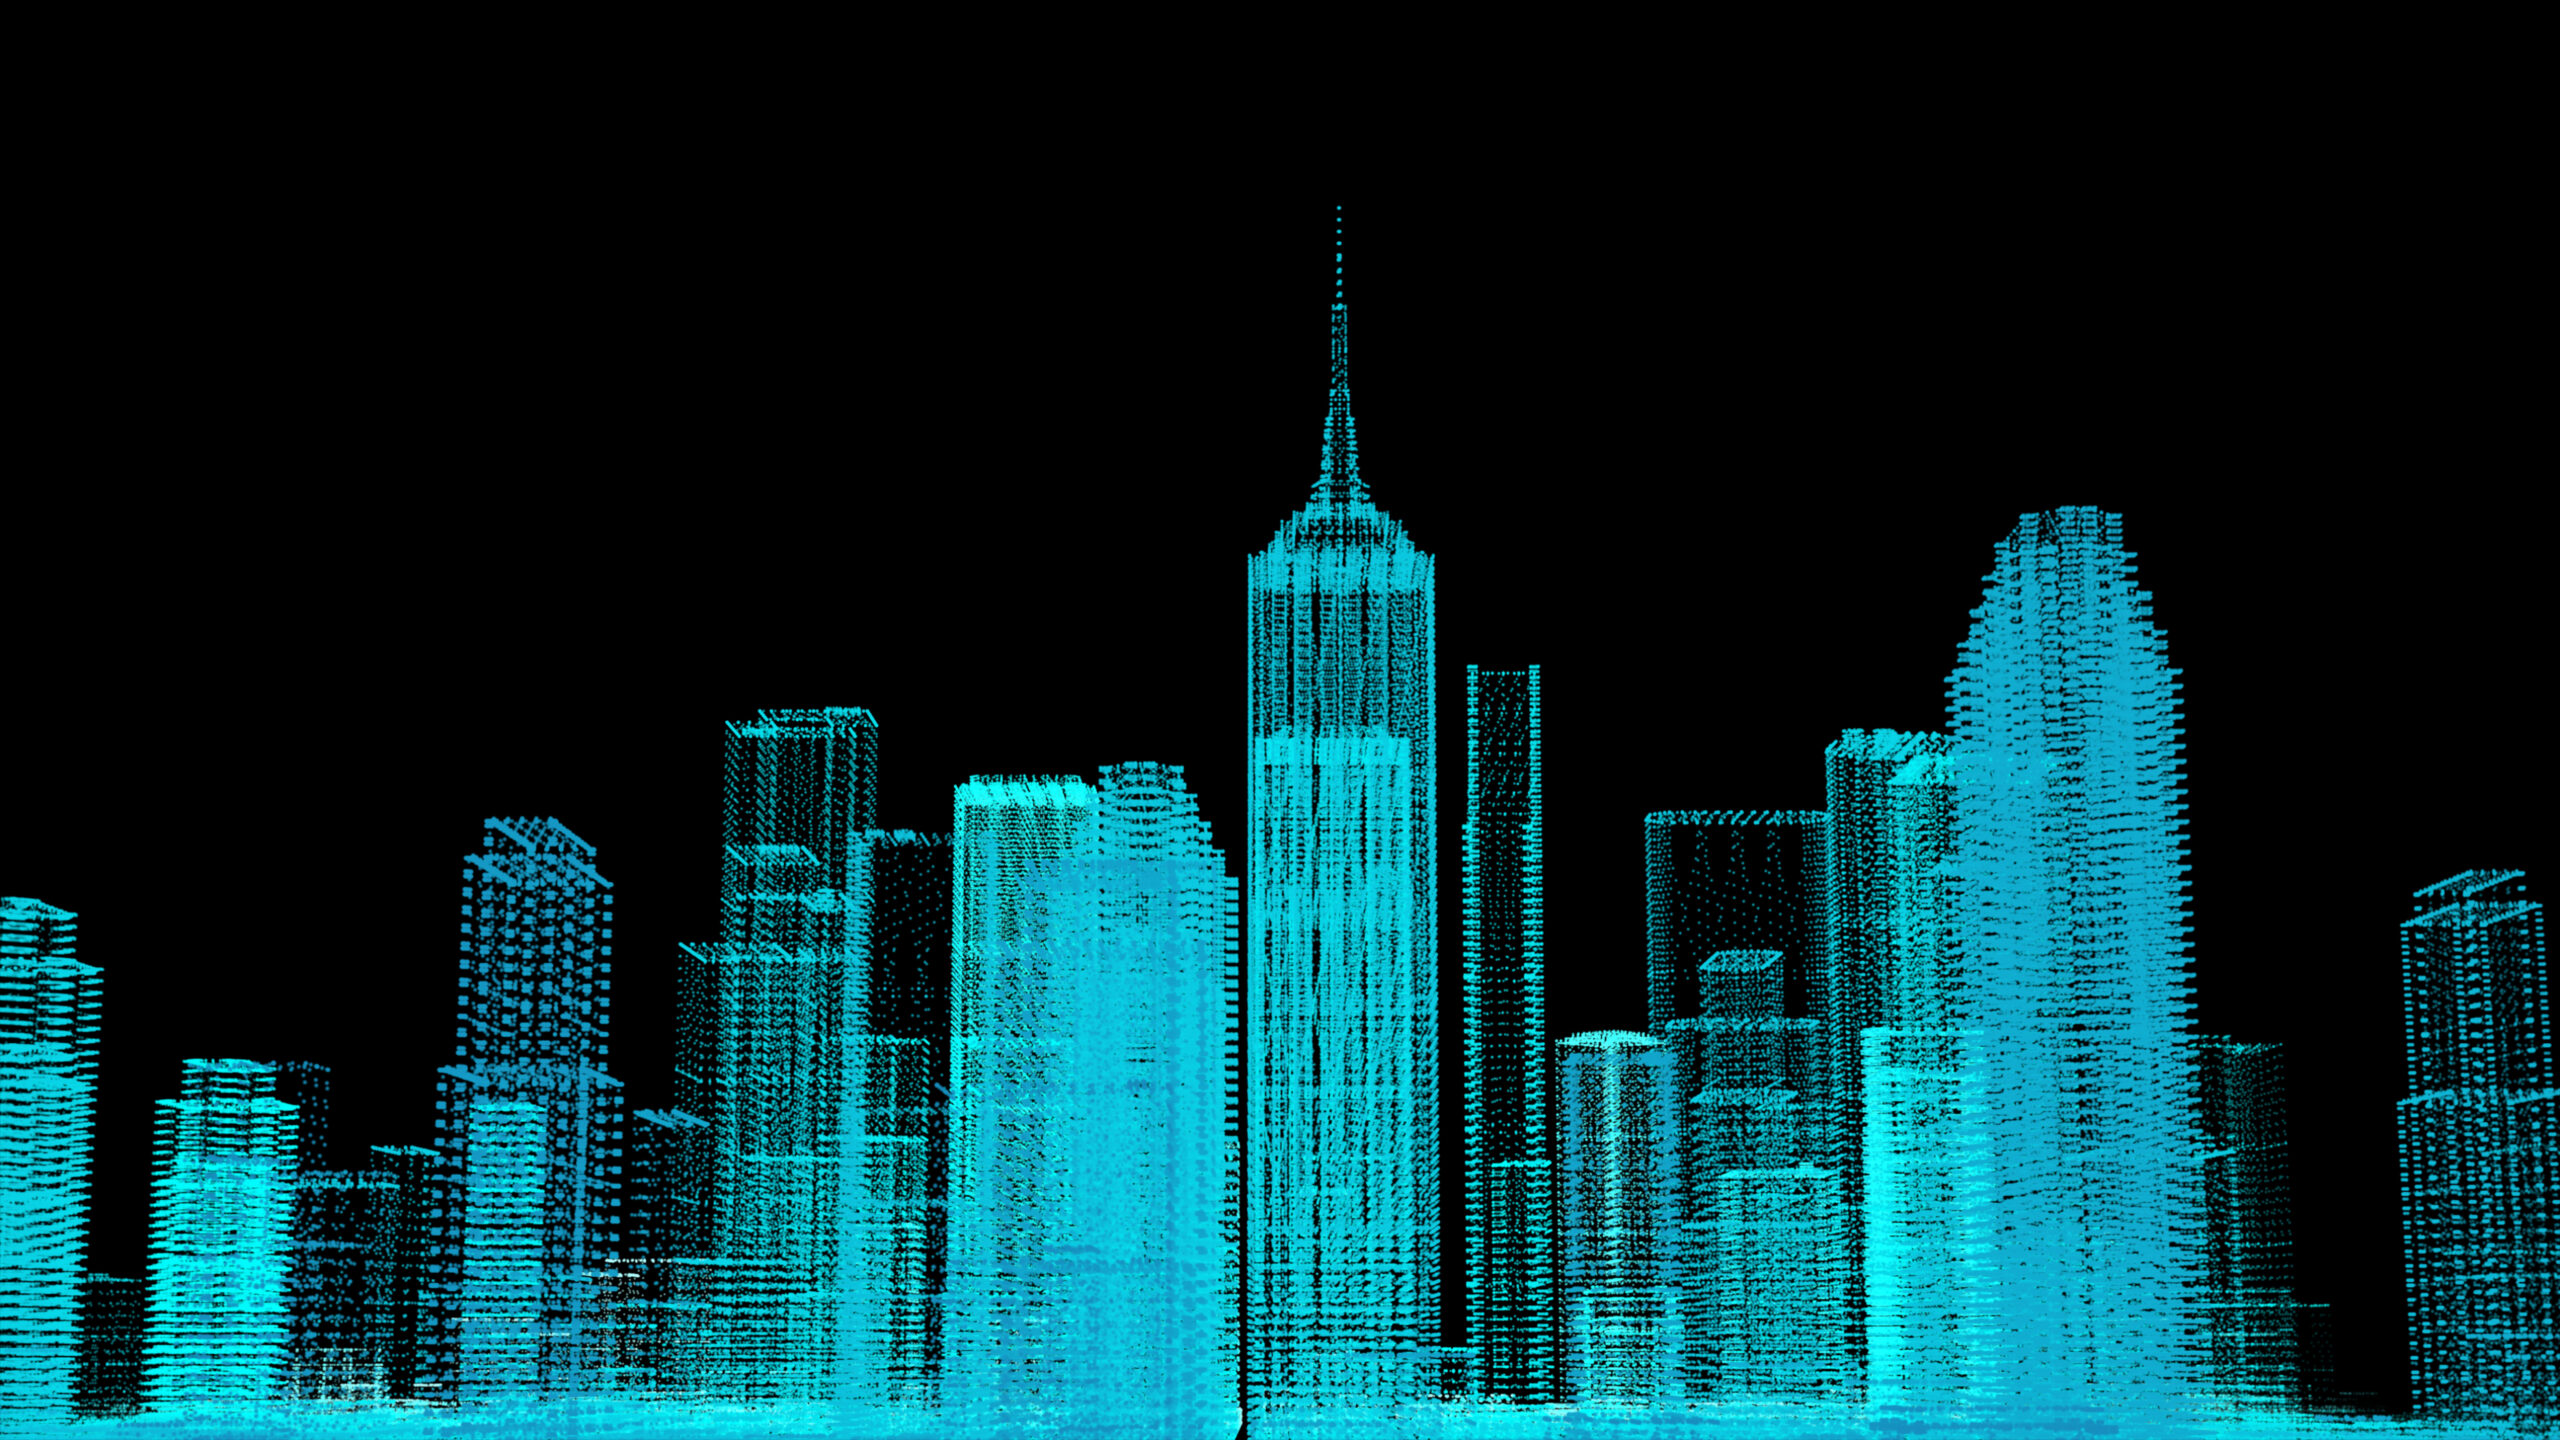 Future cyber business smart city and city power energy technology concept, neon color city architecture model, 3D presentation wallpaper background